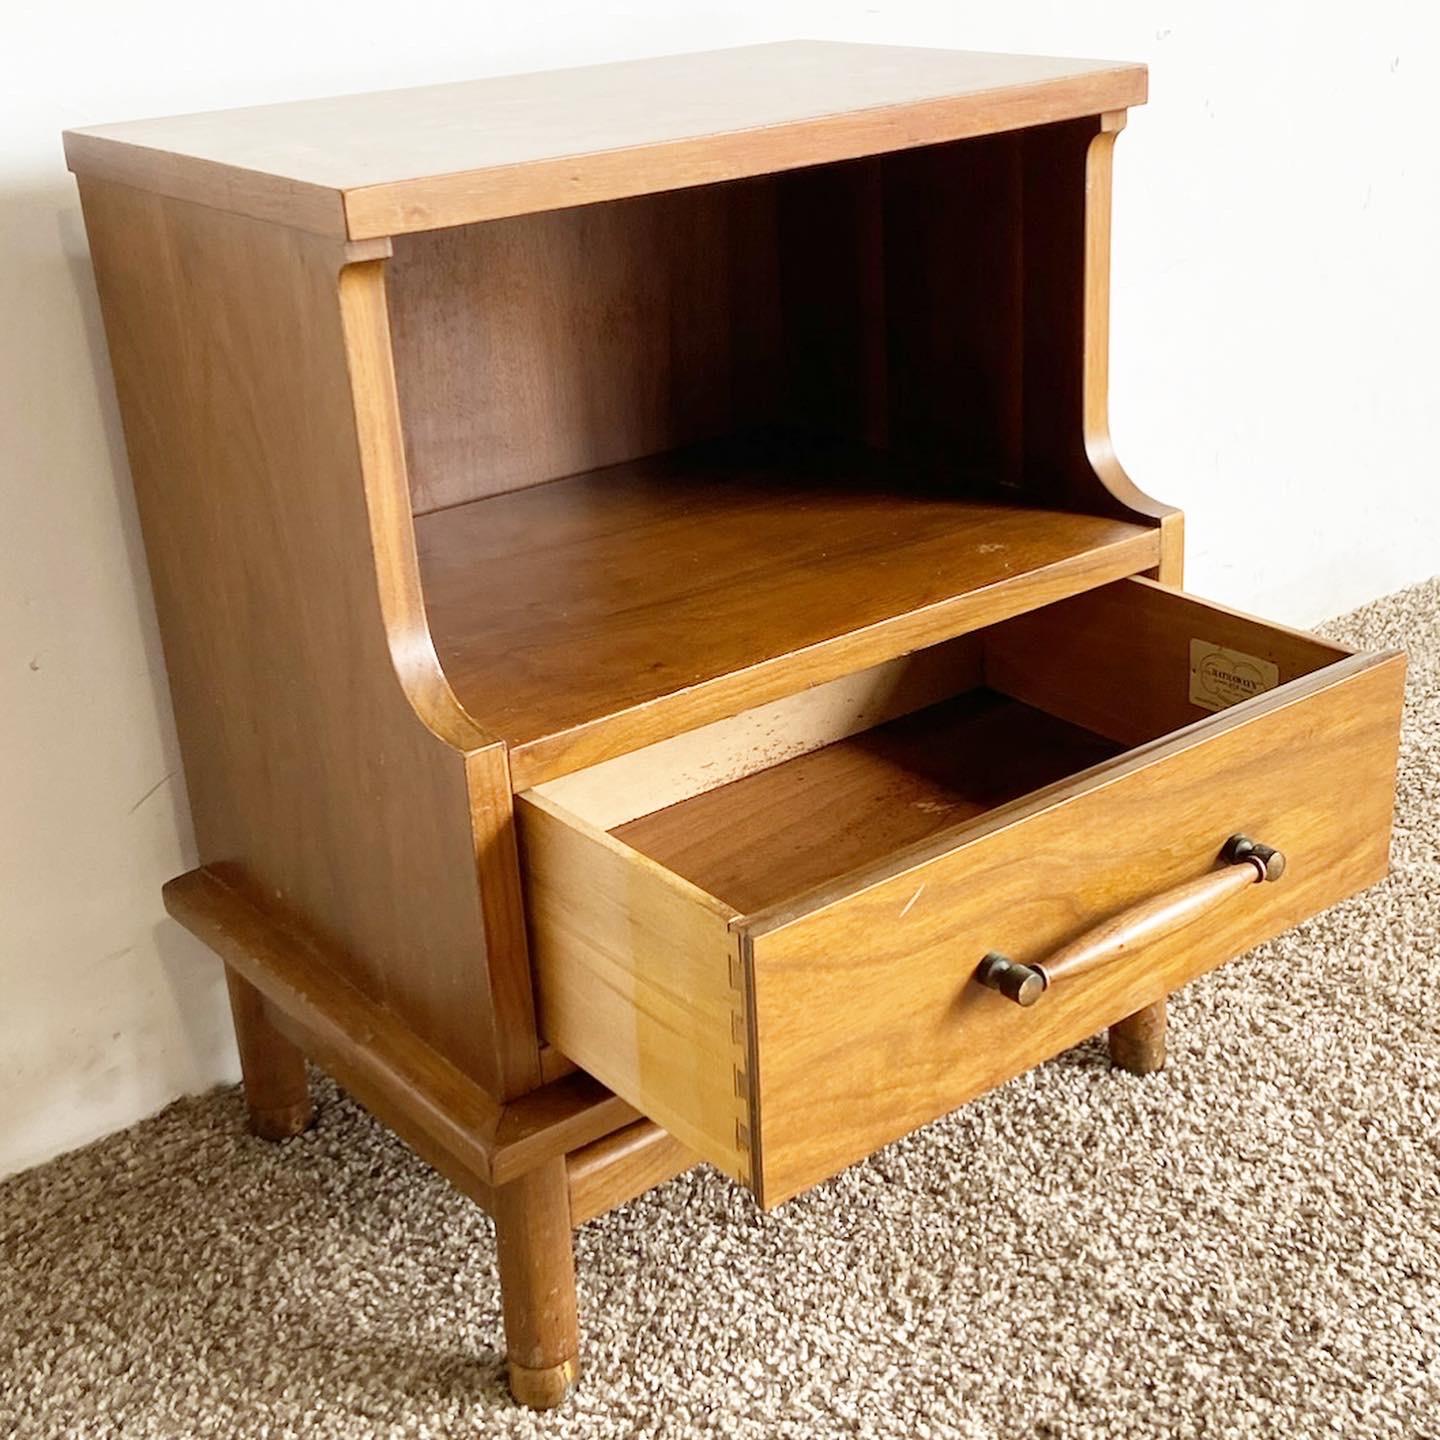 Transform your bedroom with our exceptional vintage mid century modern nightstand from Hathaway's. This nightstand boasts a spacious drawer and open shelf area, offering a perfect blend of style and functionality for your bedroom.

Exceptional